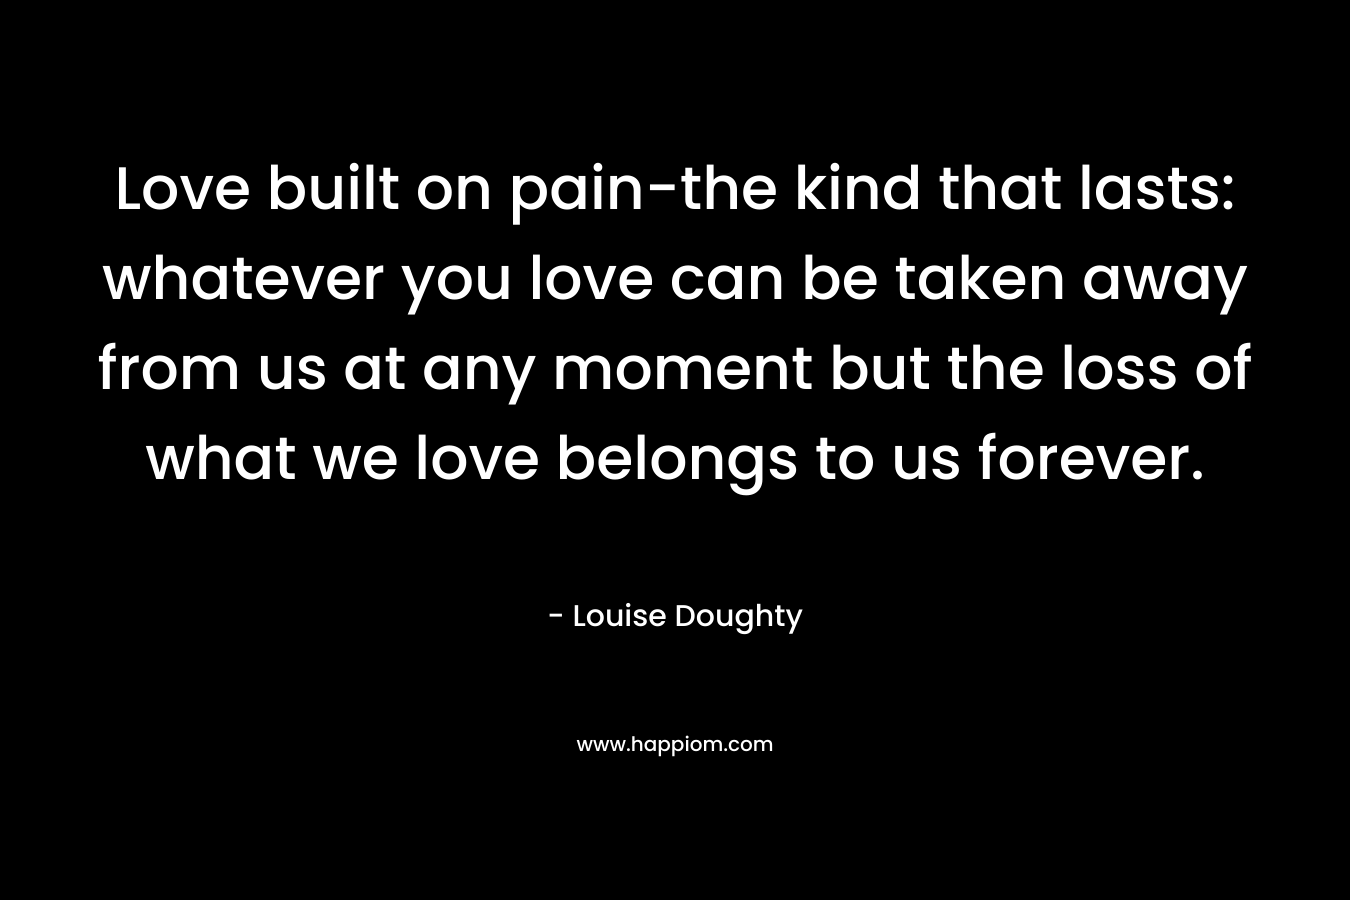 Love built on pain-the kind that lasts: whatever you love can be taken away from us at any moment but the loss of what we love belongs to us forever. – Louise Doughty